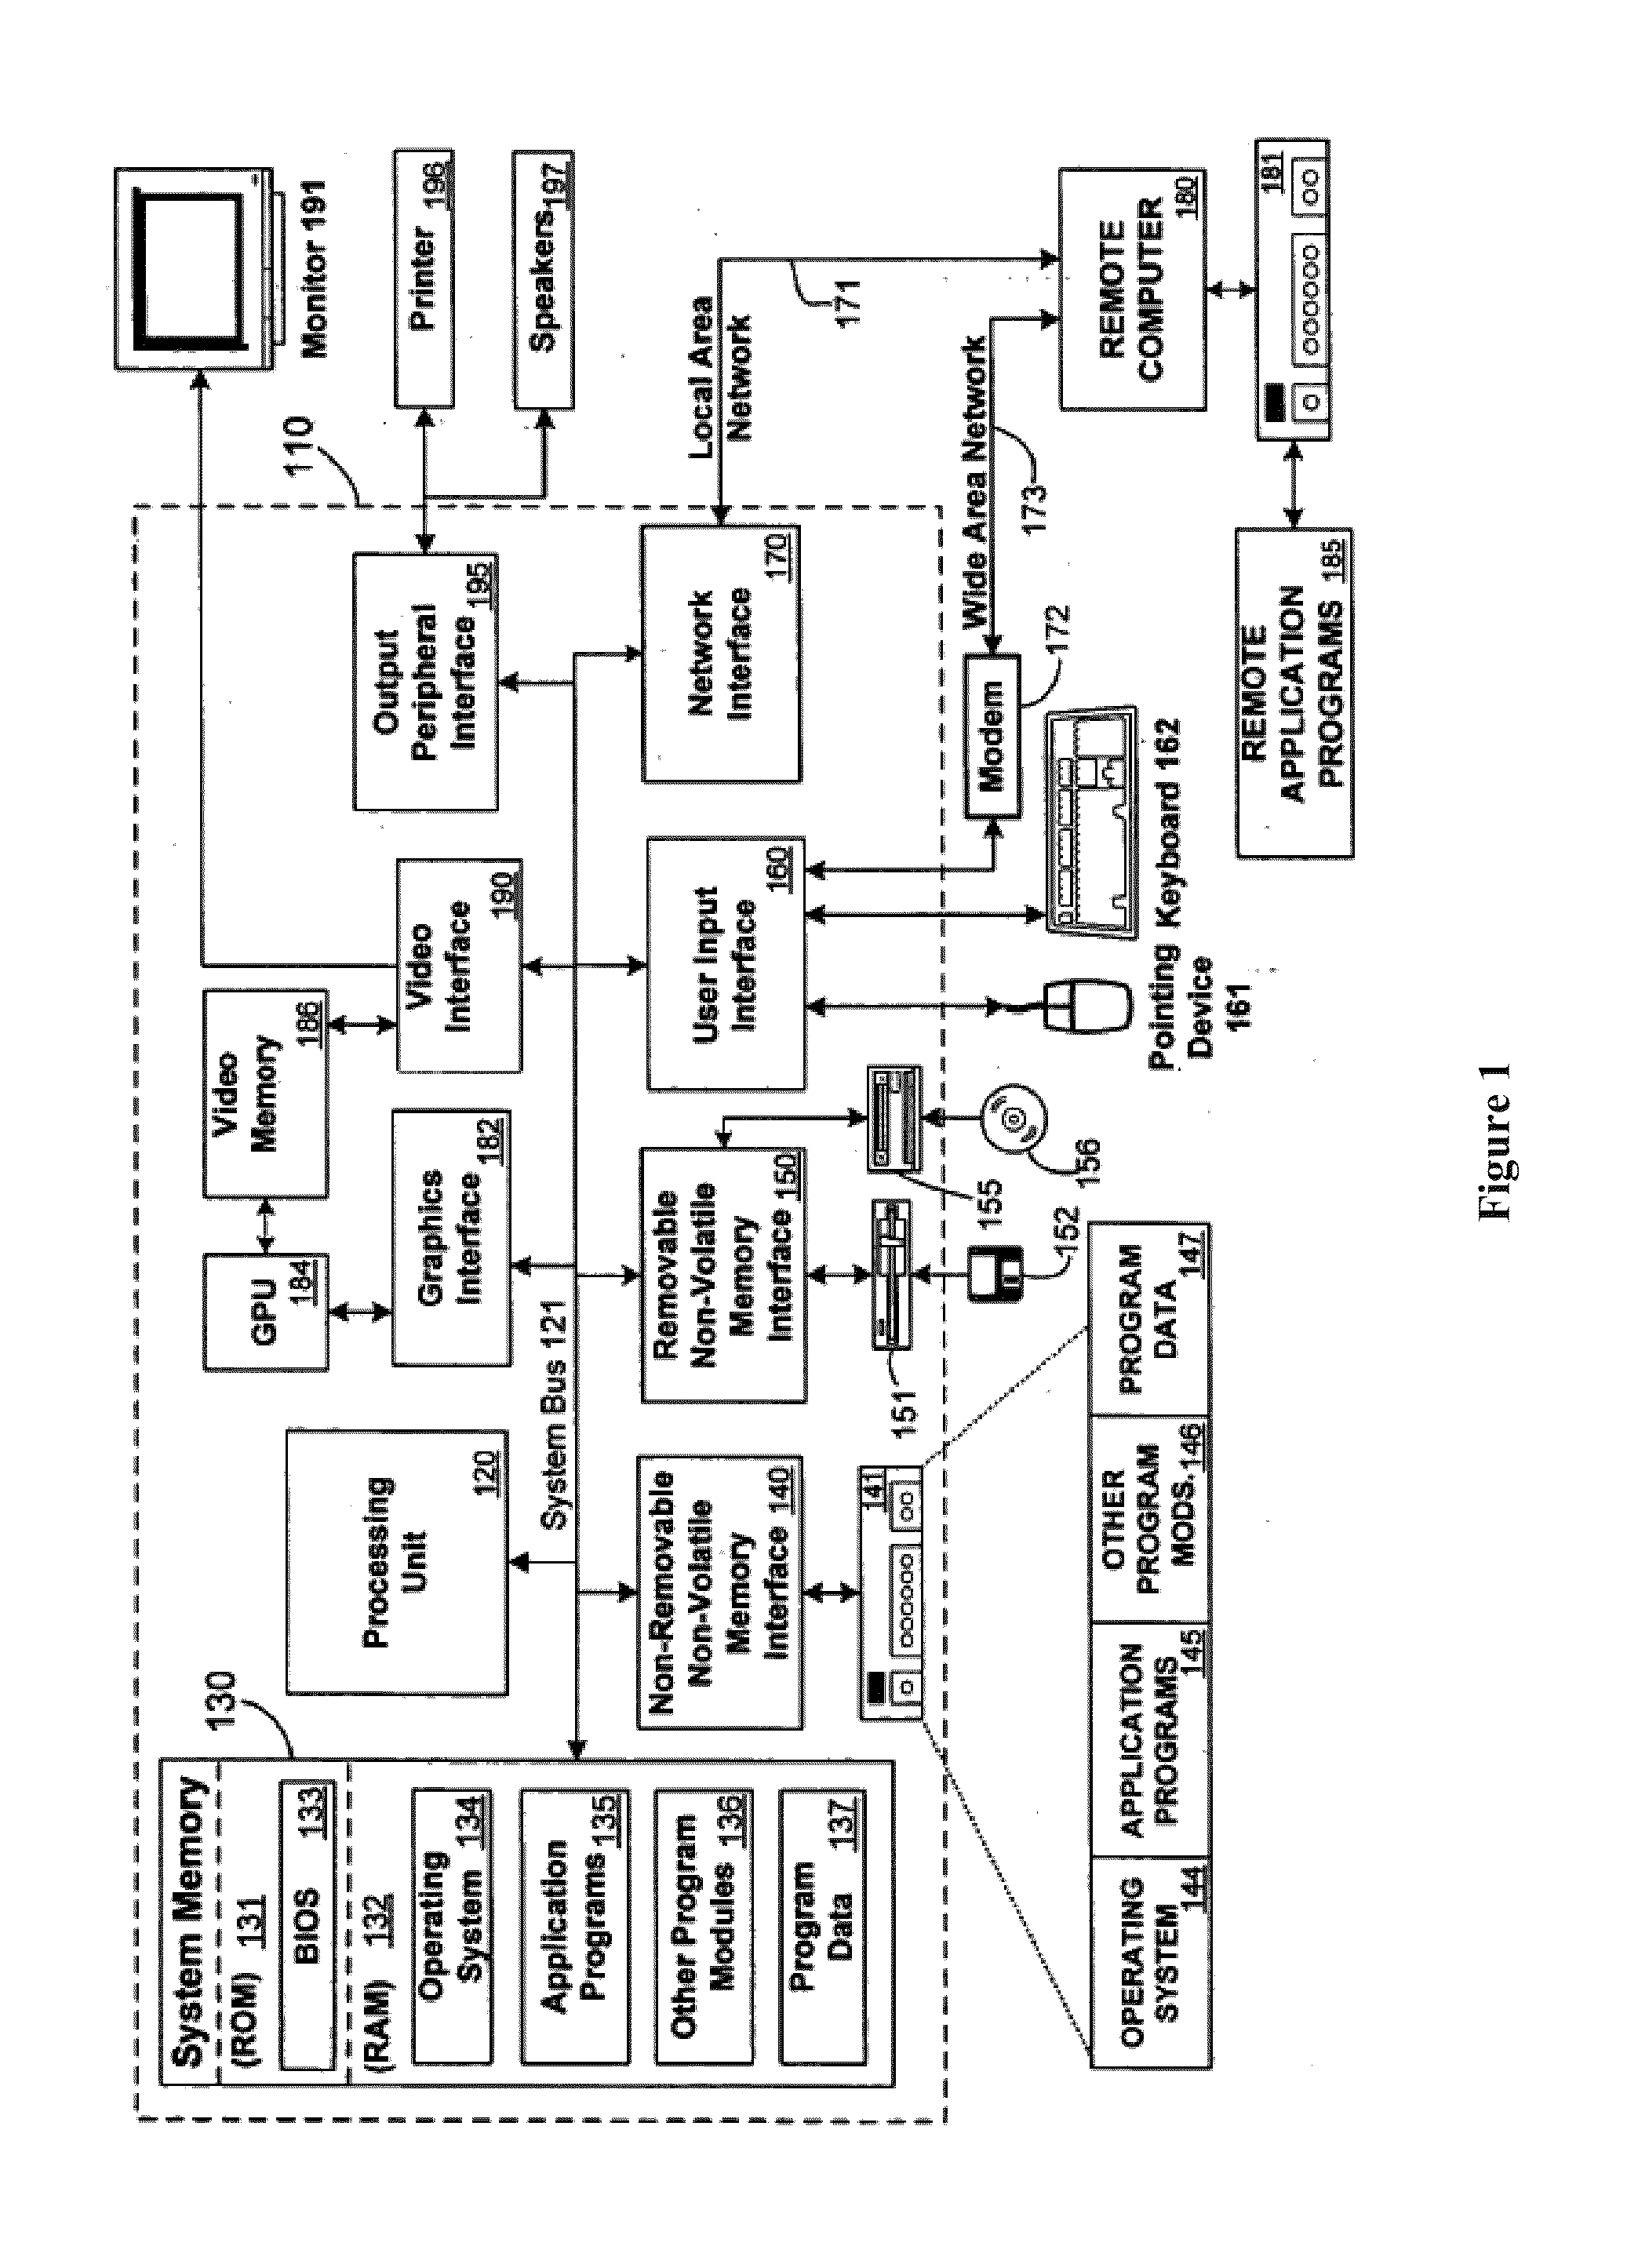 Method and System for Generating a Social Commerce and Marketing Site